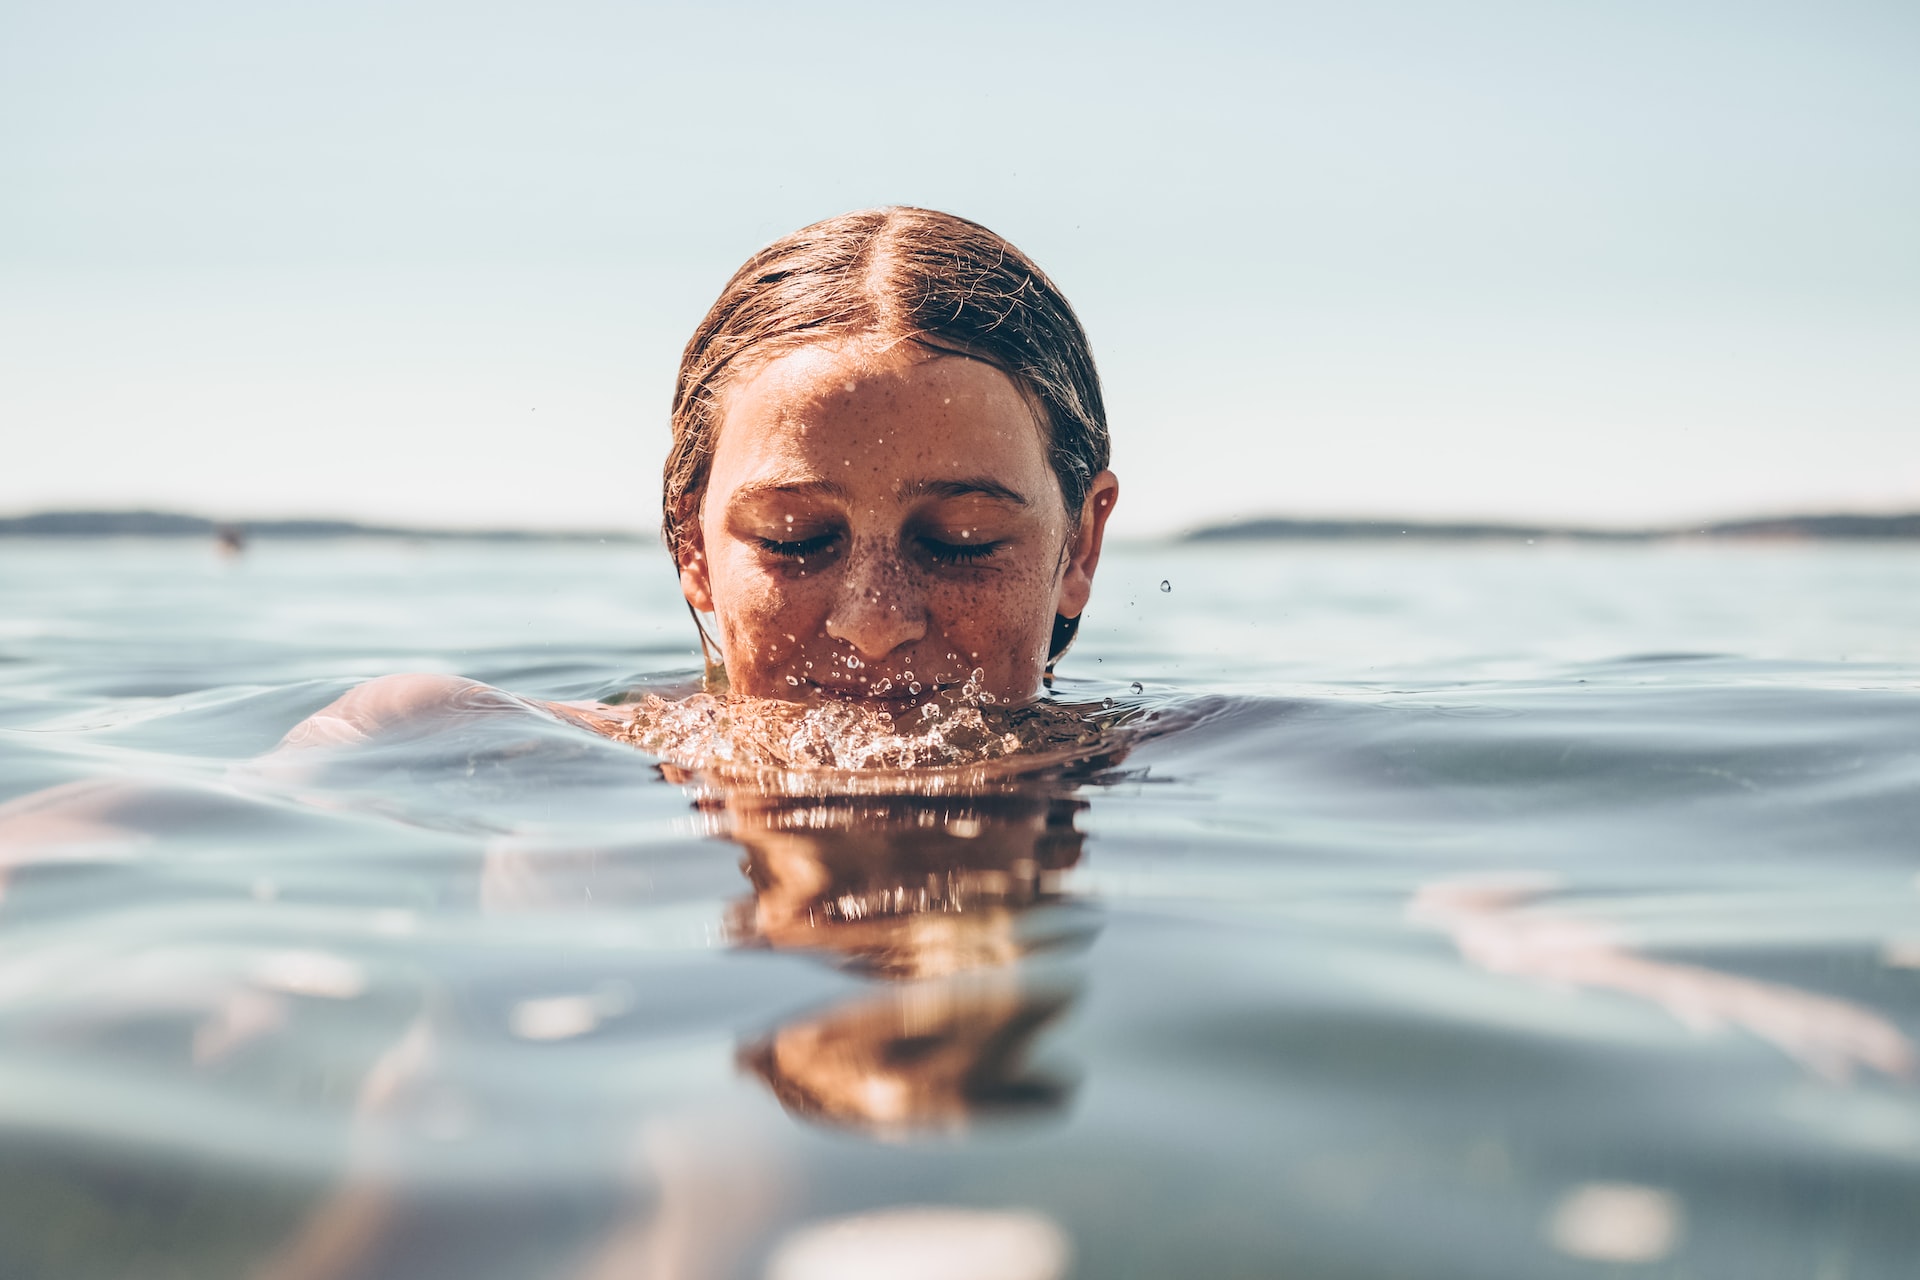 7 Key Benefits of Cold Water Swimming